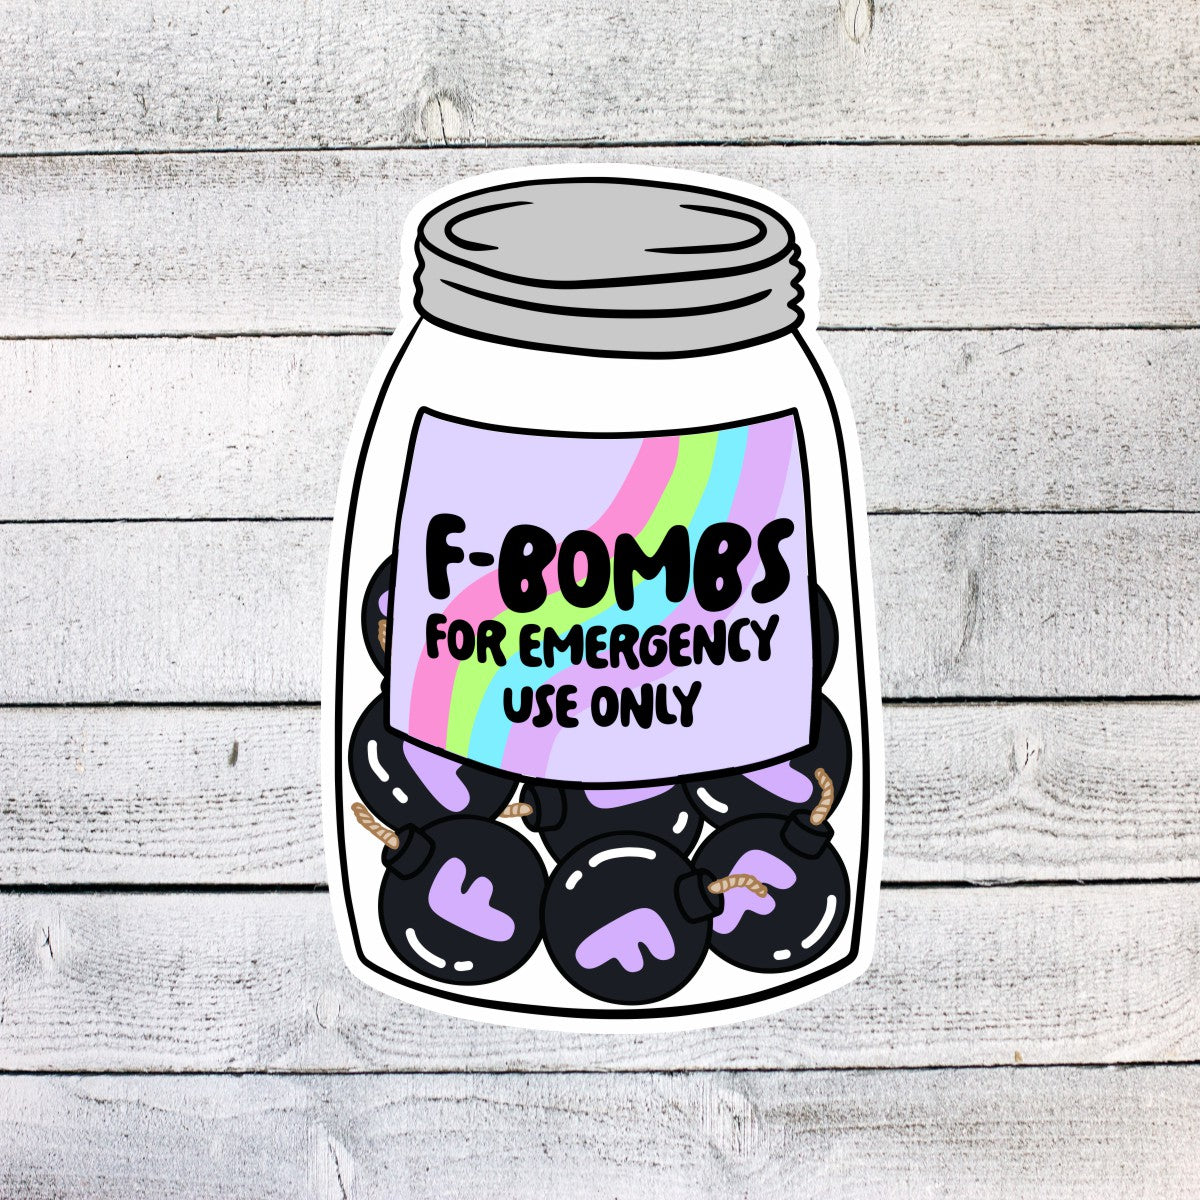 F-Bombs for Emergency Use Only Jar Sticker